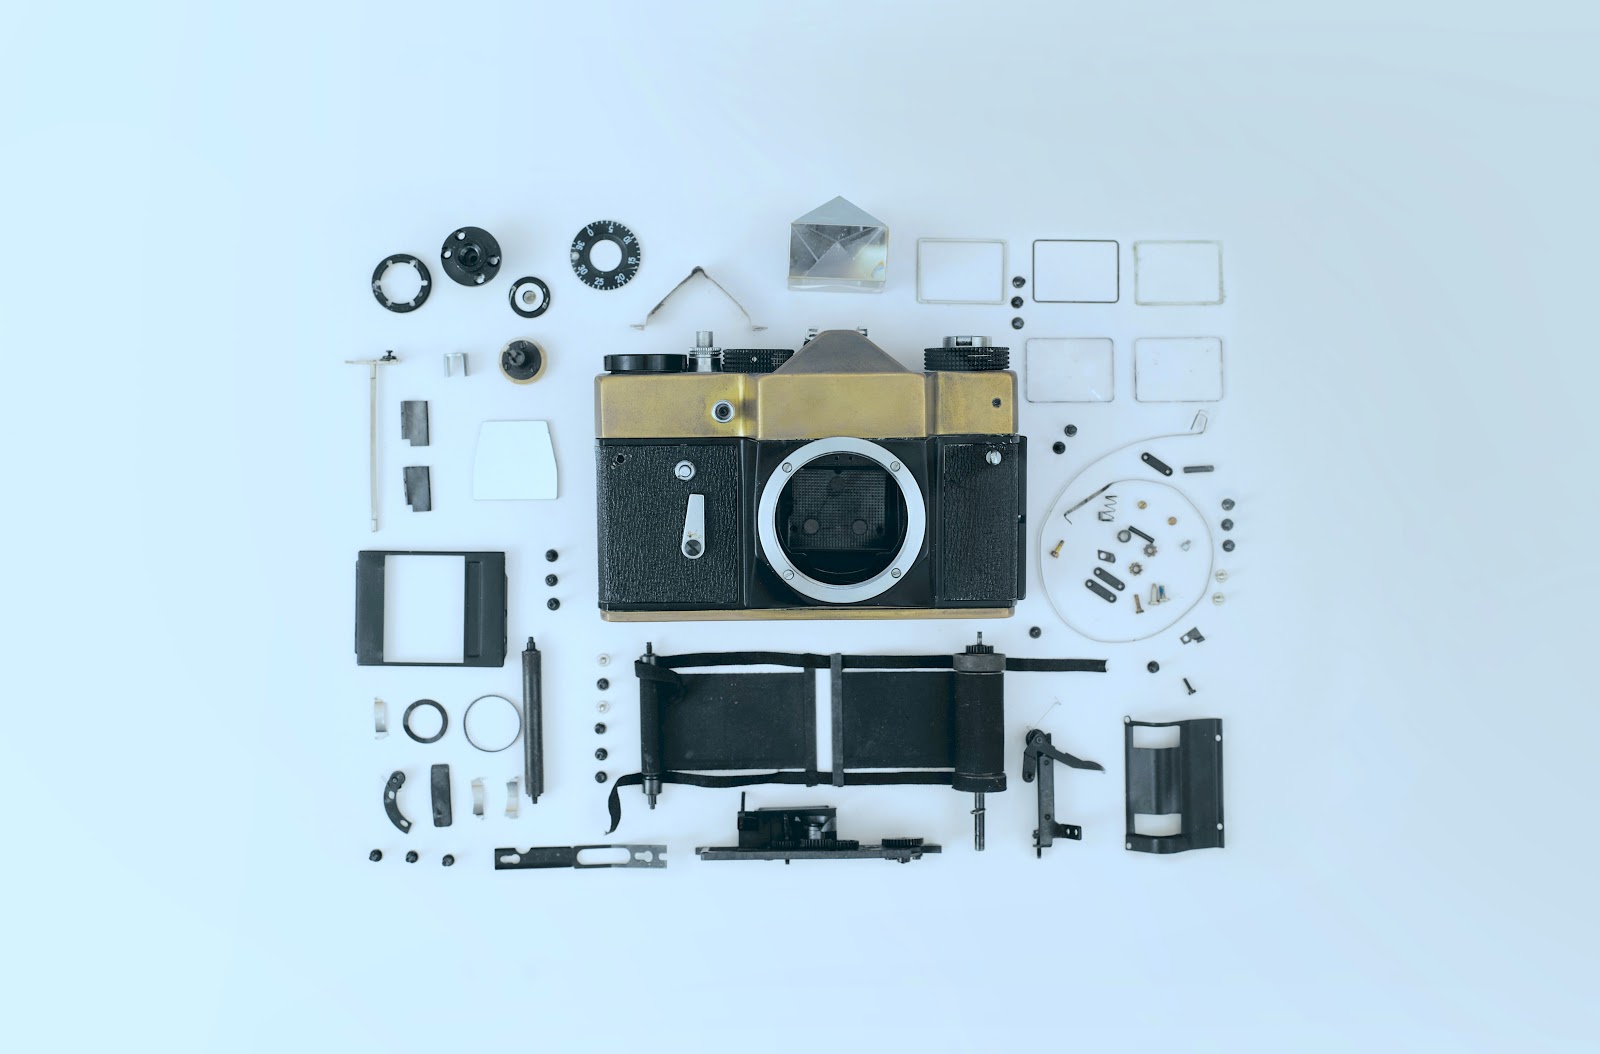 A disassembled single lens reflex camera with all its parts